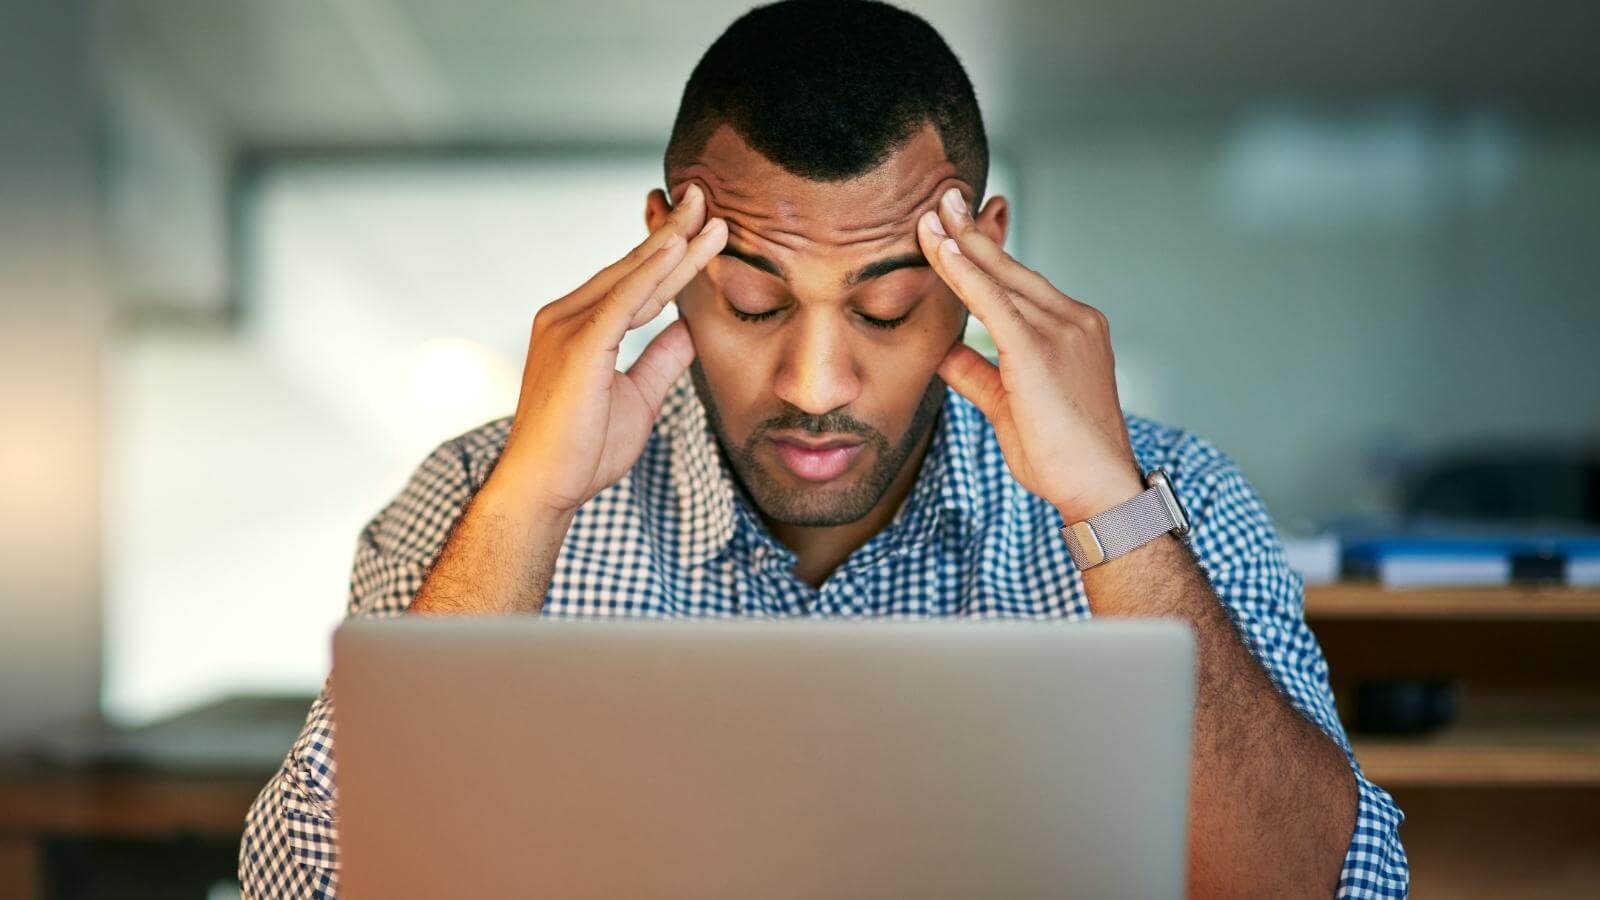 Man stressed rubbing forehead while working